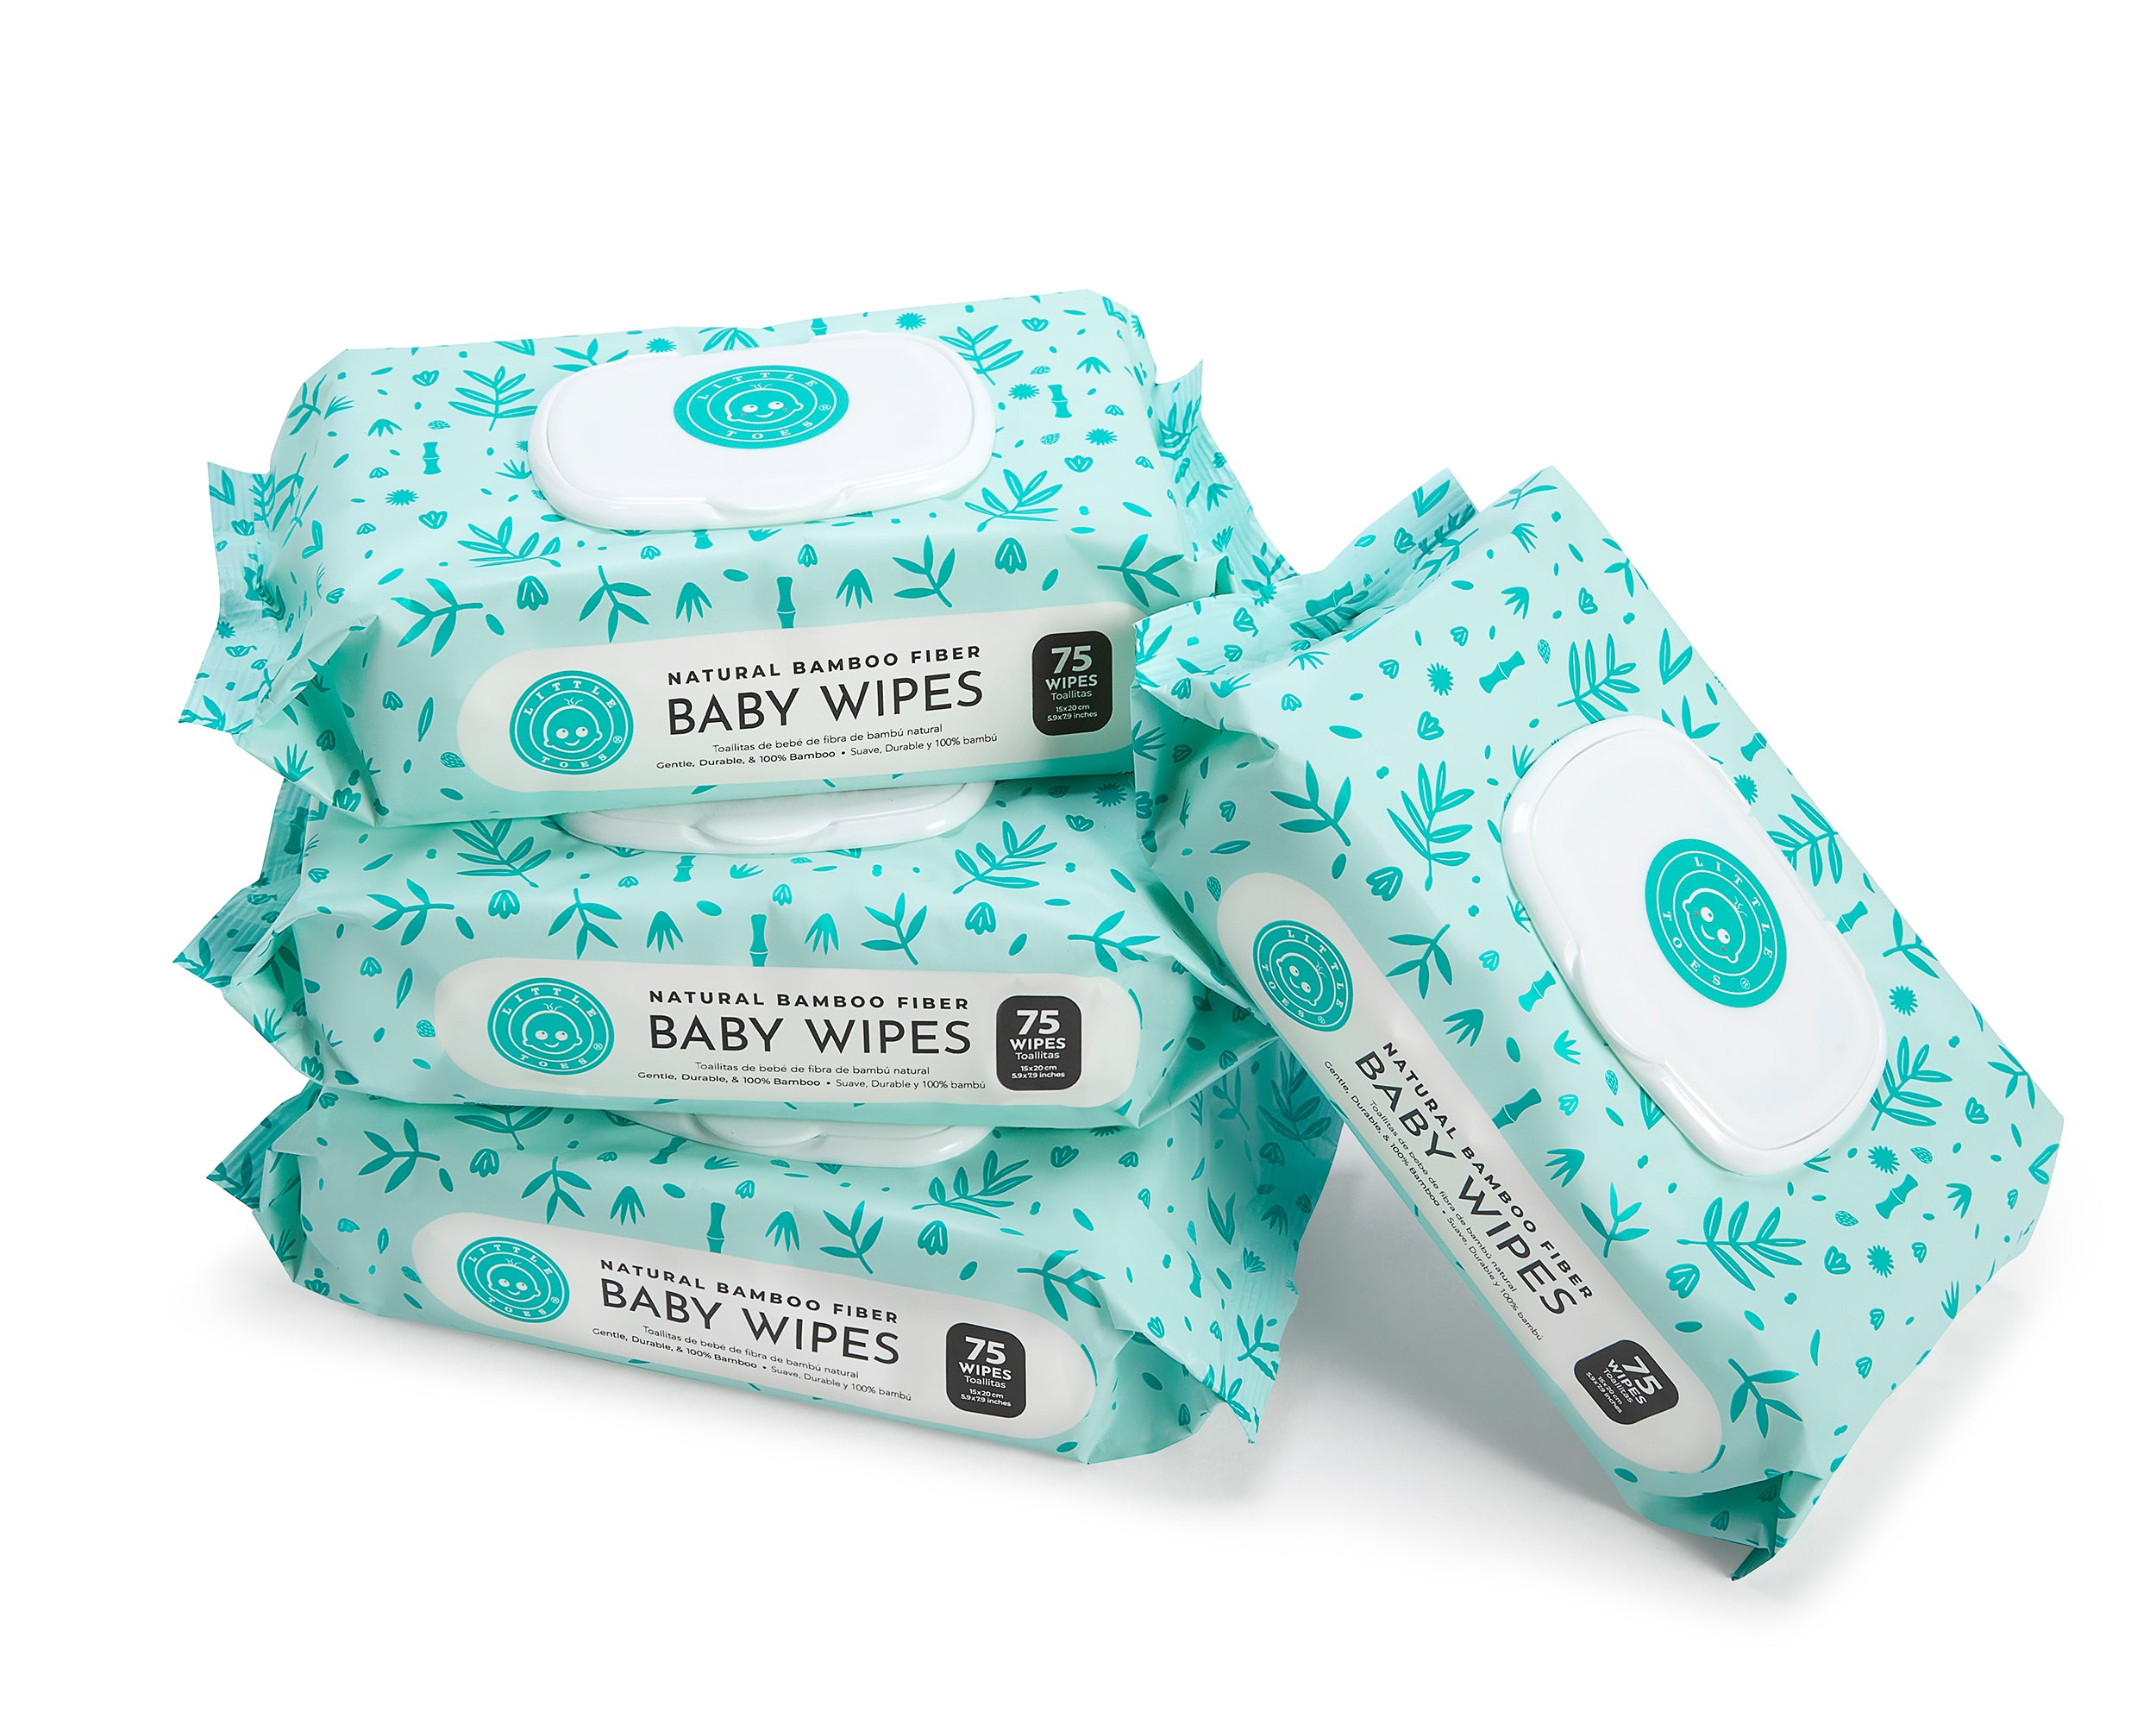 Baby Wipes Subscription - 4 Packs of 75 Wipes